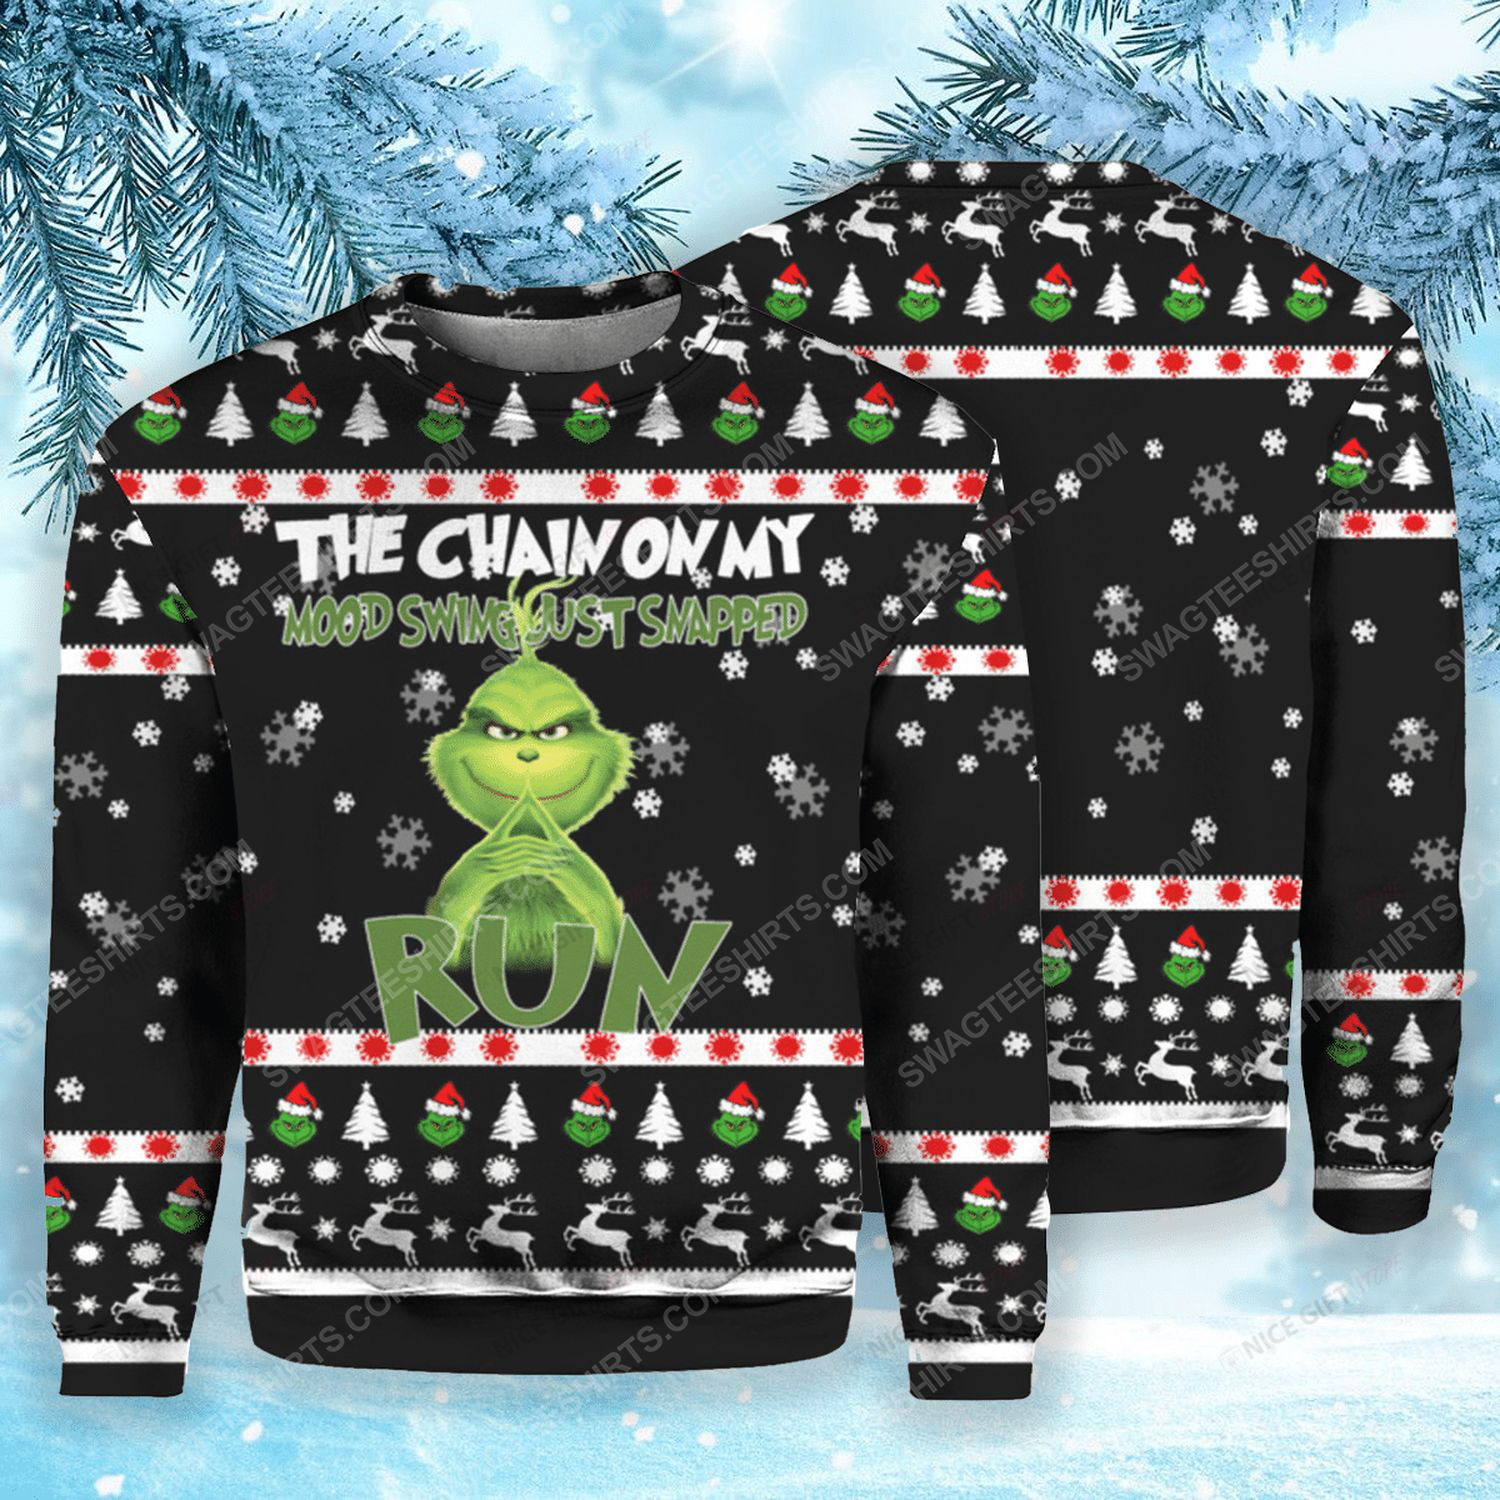 Grinch the chains on my mood swing just snapped run ugly christmas sweater 1 - Copy (3)